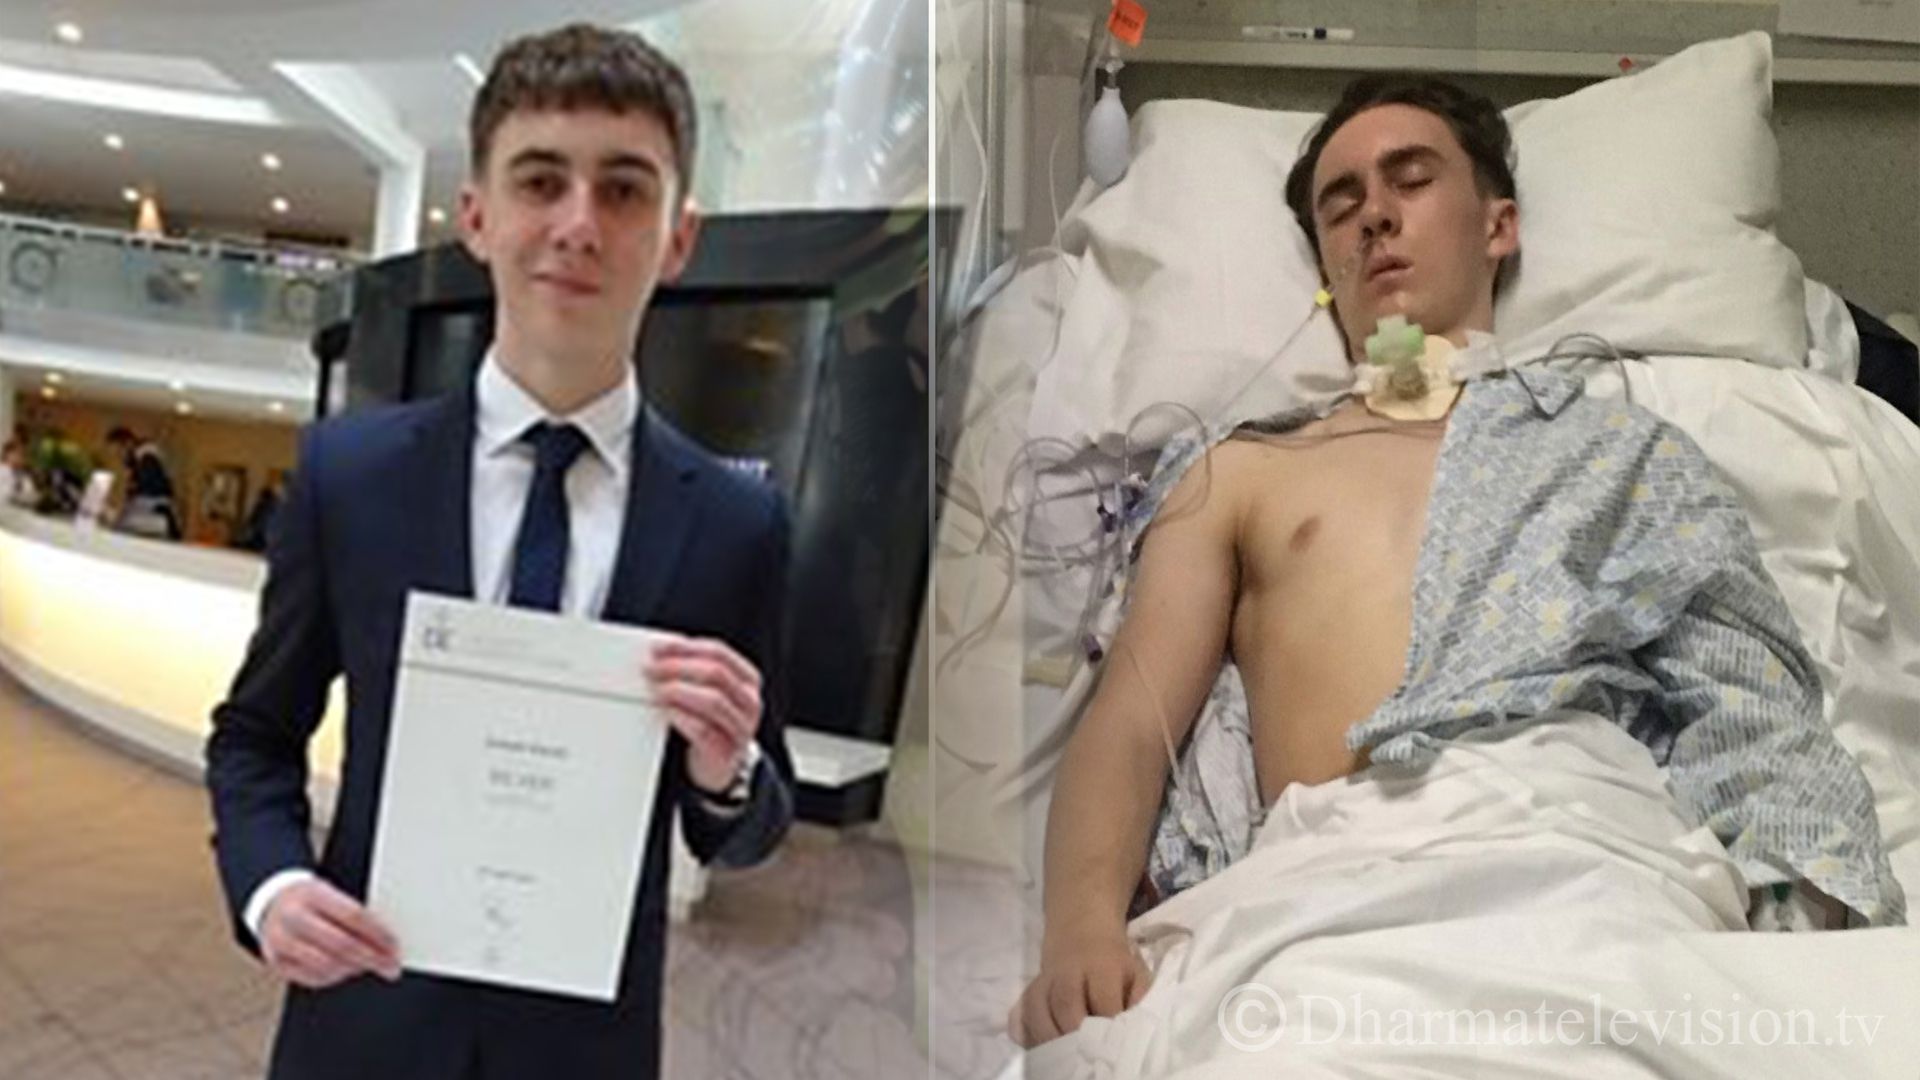 Joseph Flavill a teenage boy wakes from coma with no knowledge of pandemic